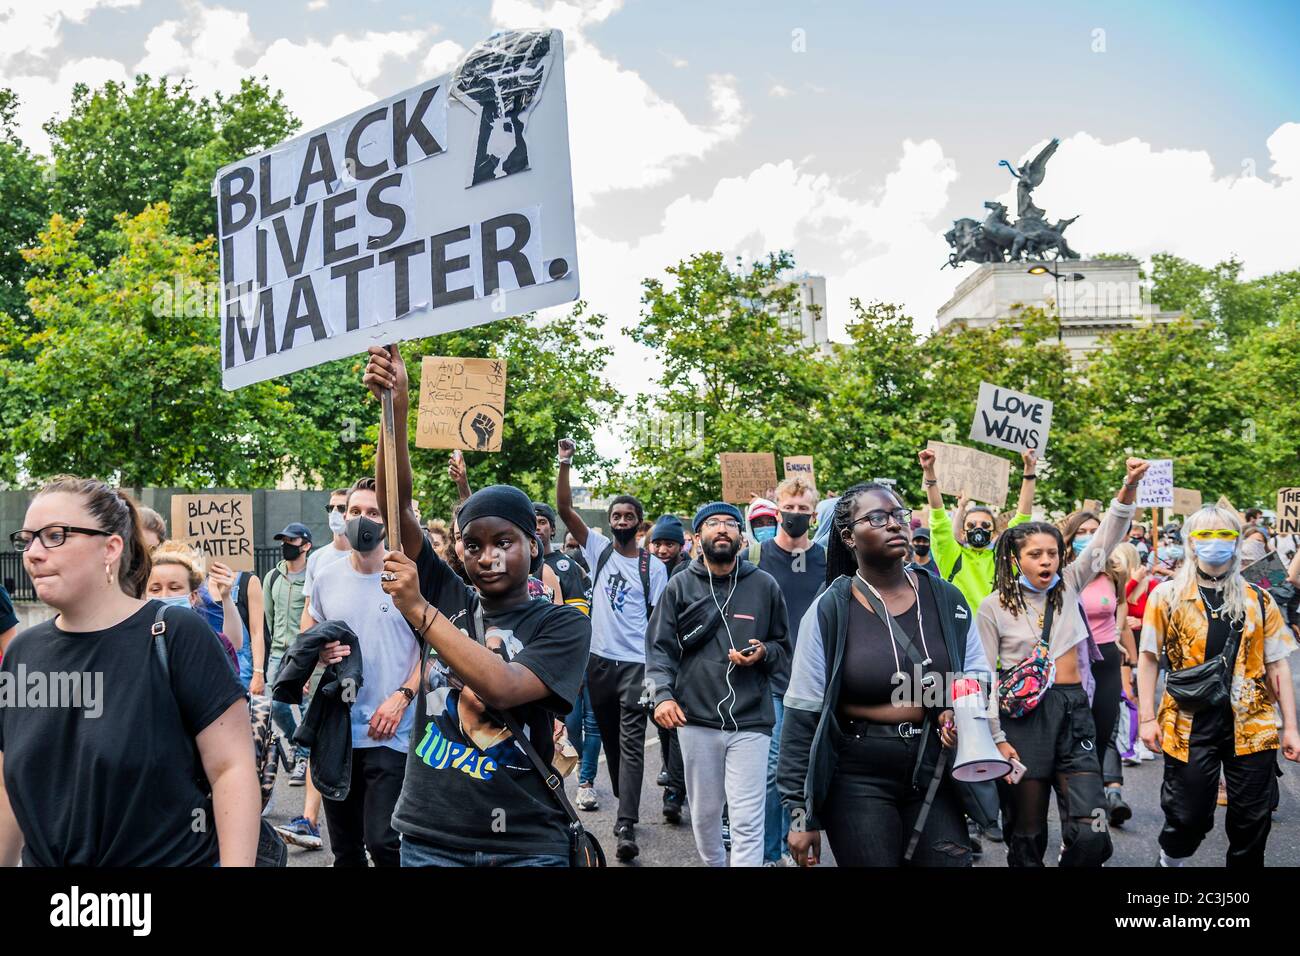 London, UK. 20th June, 2020. They then march to Westmister - Black Lives Matter protesters, gather in Hyde Park again, to respond to the the death of George Floyd, in Minneapolis. The 46-year-old African American was filmed as a white police officer kneeled on his neck for almost nine minutes. The eased 'lockdown' continues for the Coronavirus (Covid 19) outbreak in London. Credit: Guy Bell/Alamy Live News Stock Photo